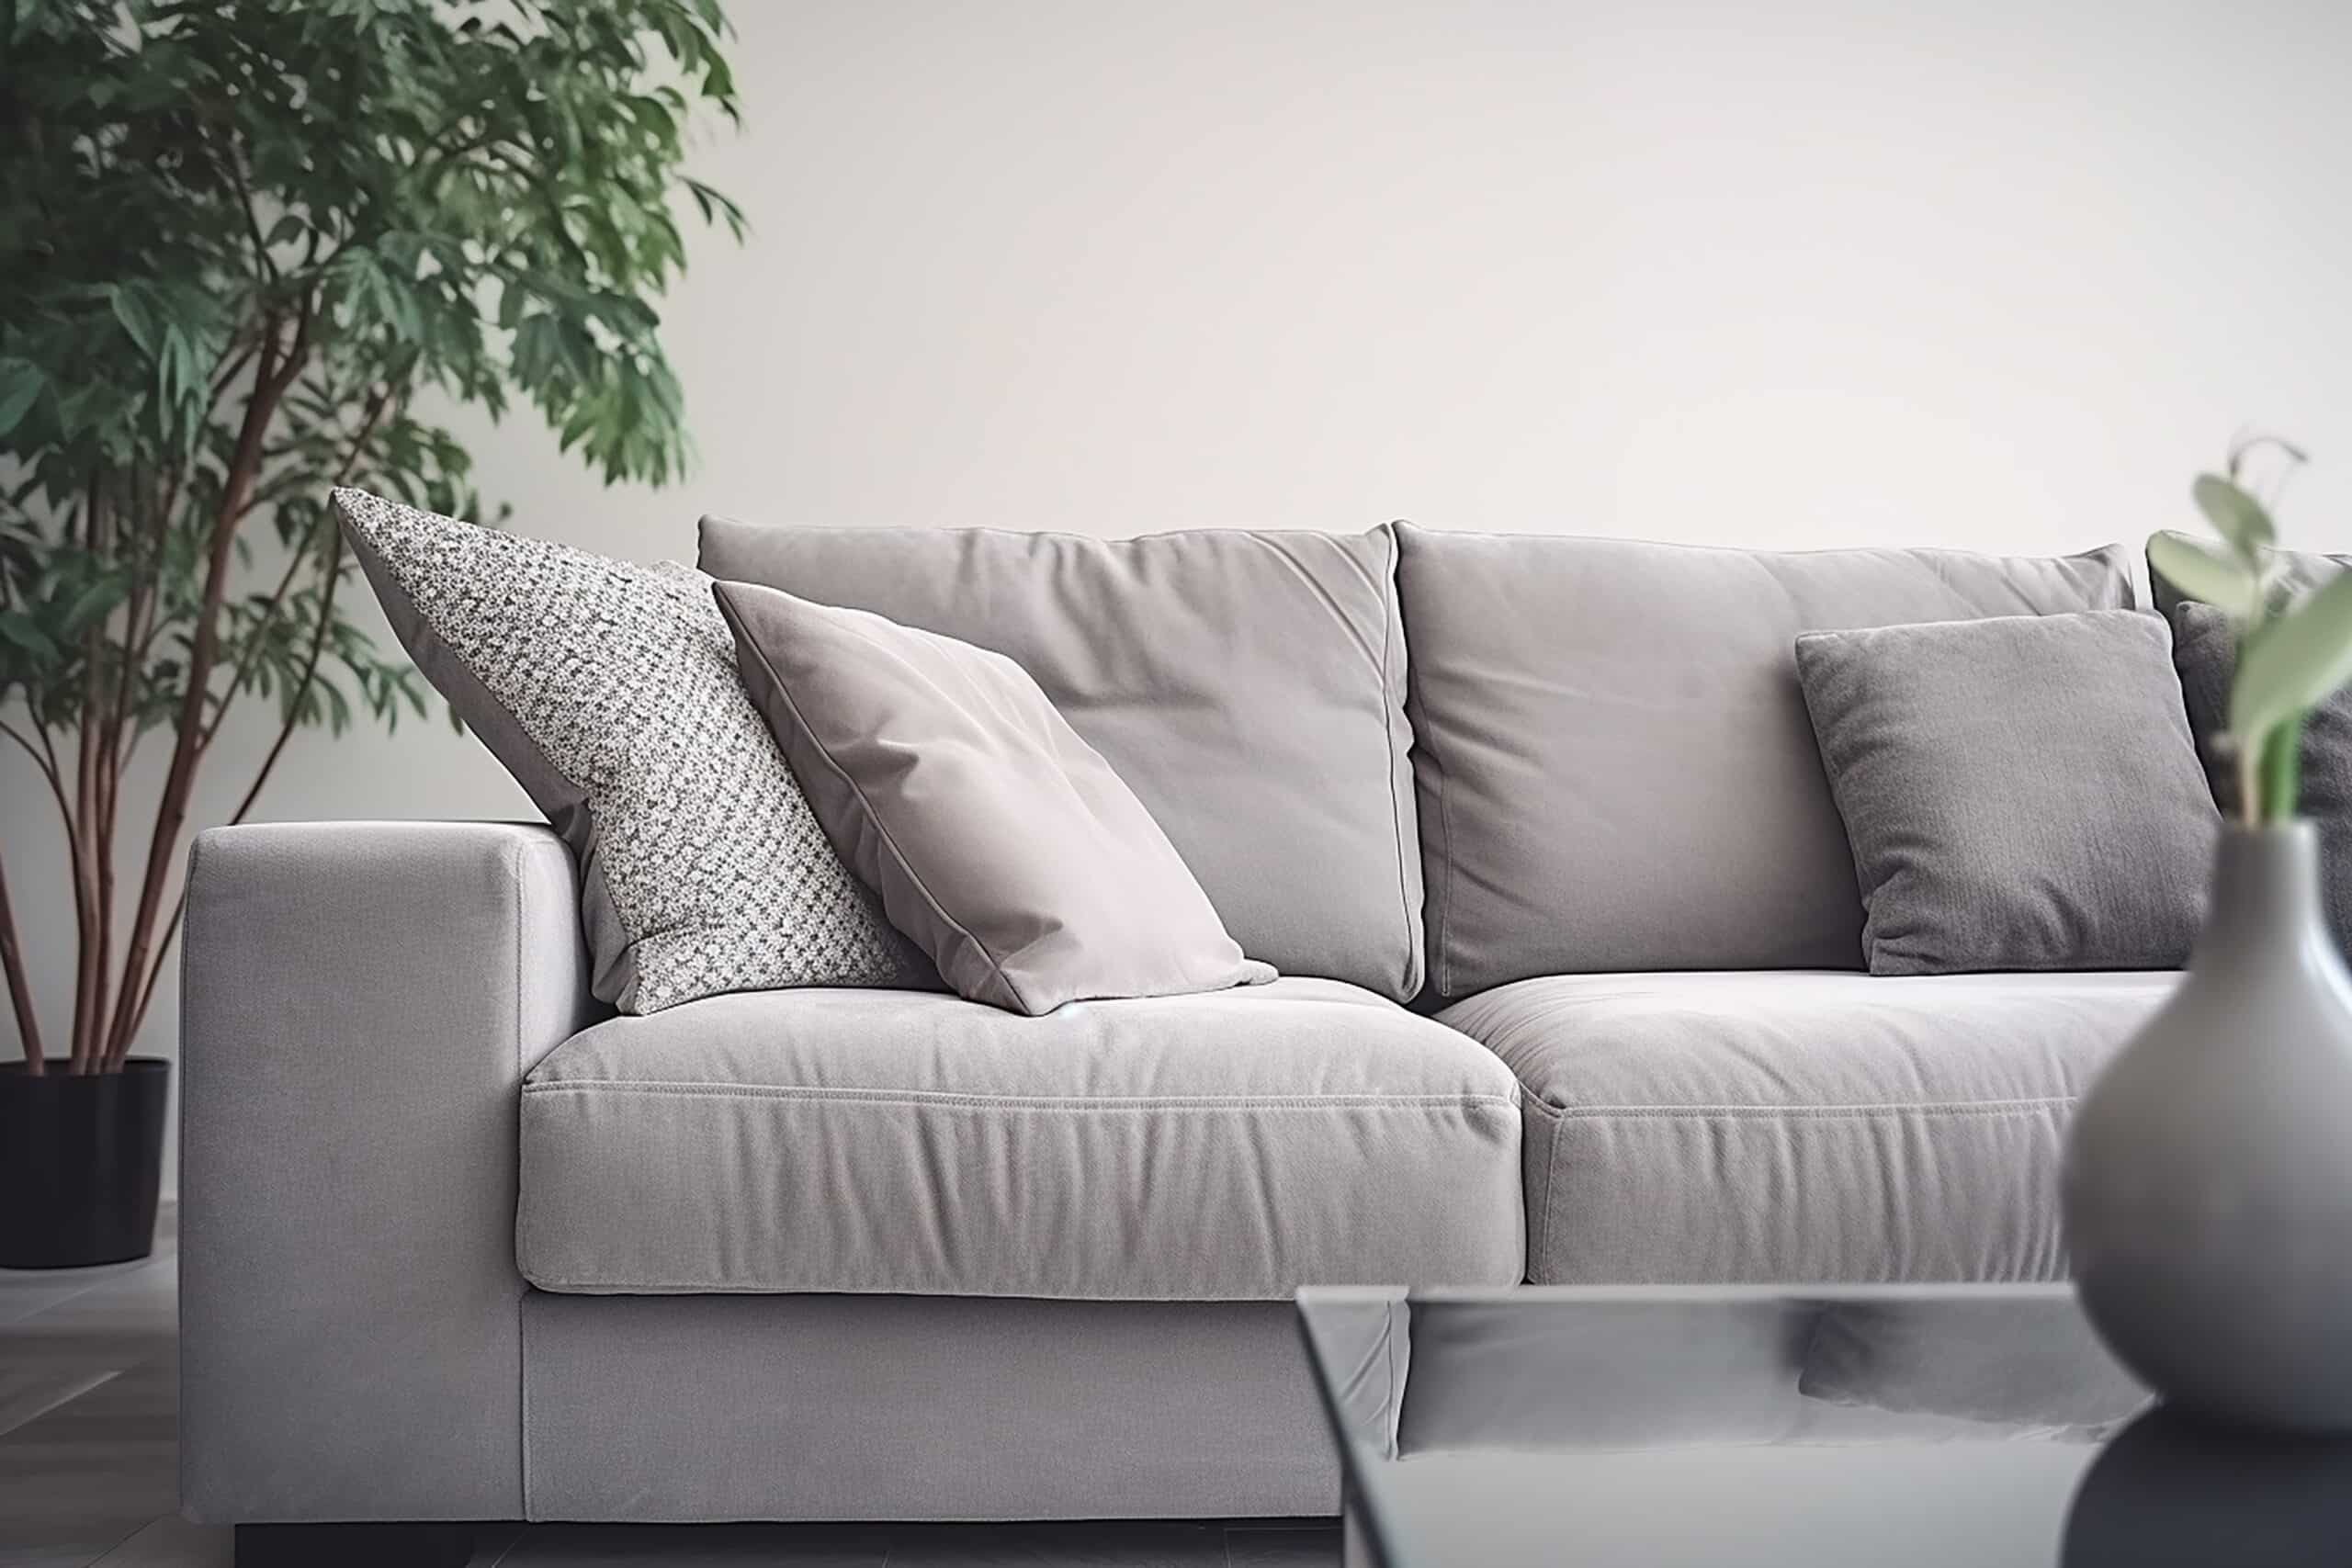 www.appr.com : Are steam cleaners safe to use on all types of upholstery fabric?